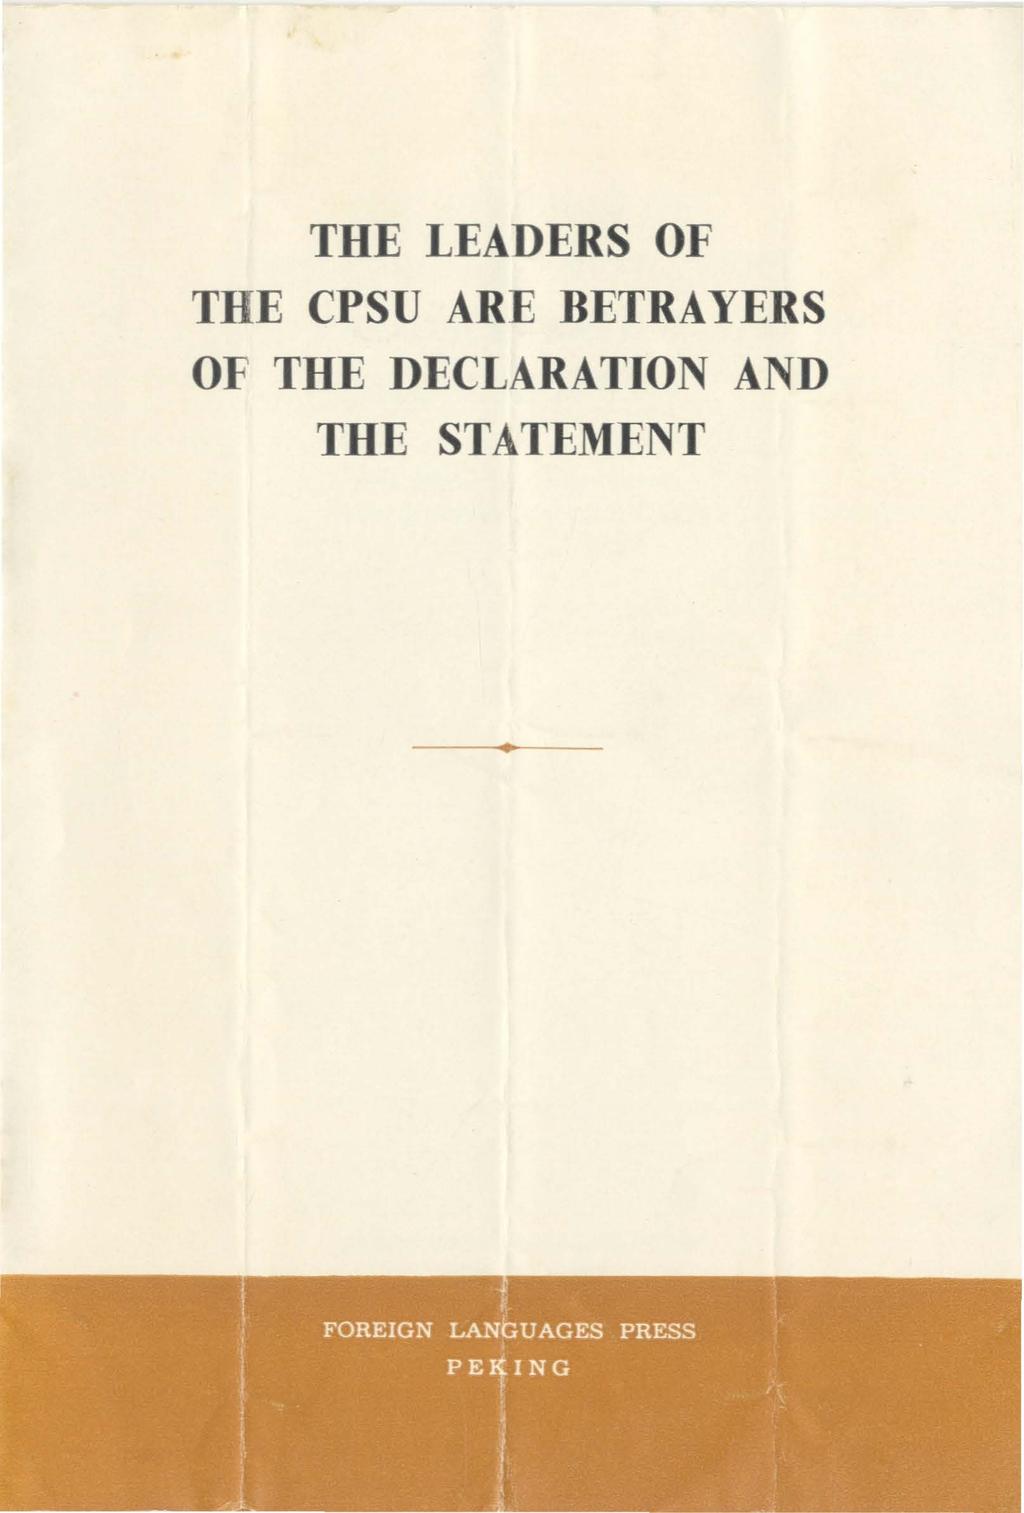 THE LEADERS OF THE CPSU ARE